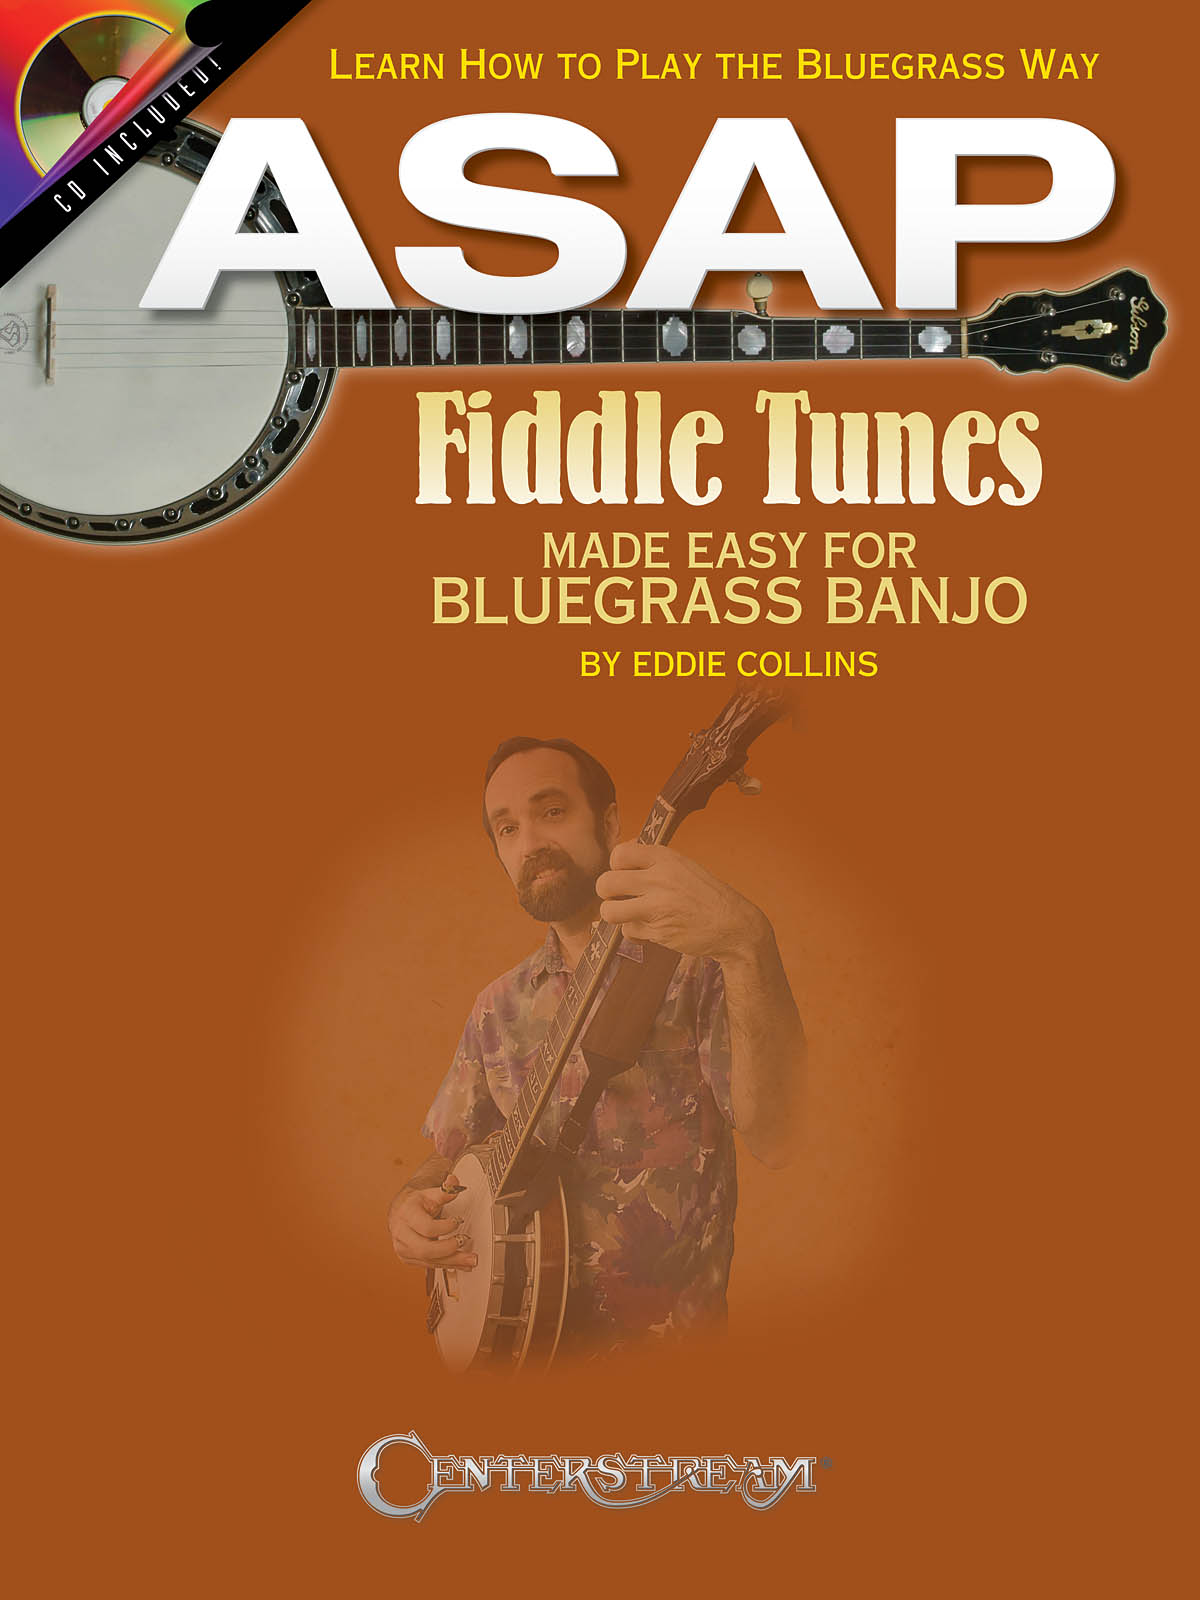 Asap Fiddle Tunes Made Easy For Bluegrass Banjo  - noty pro banjo